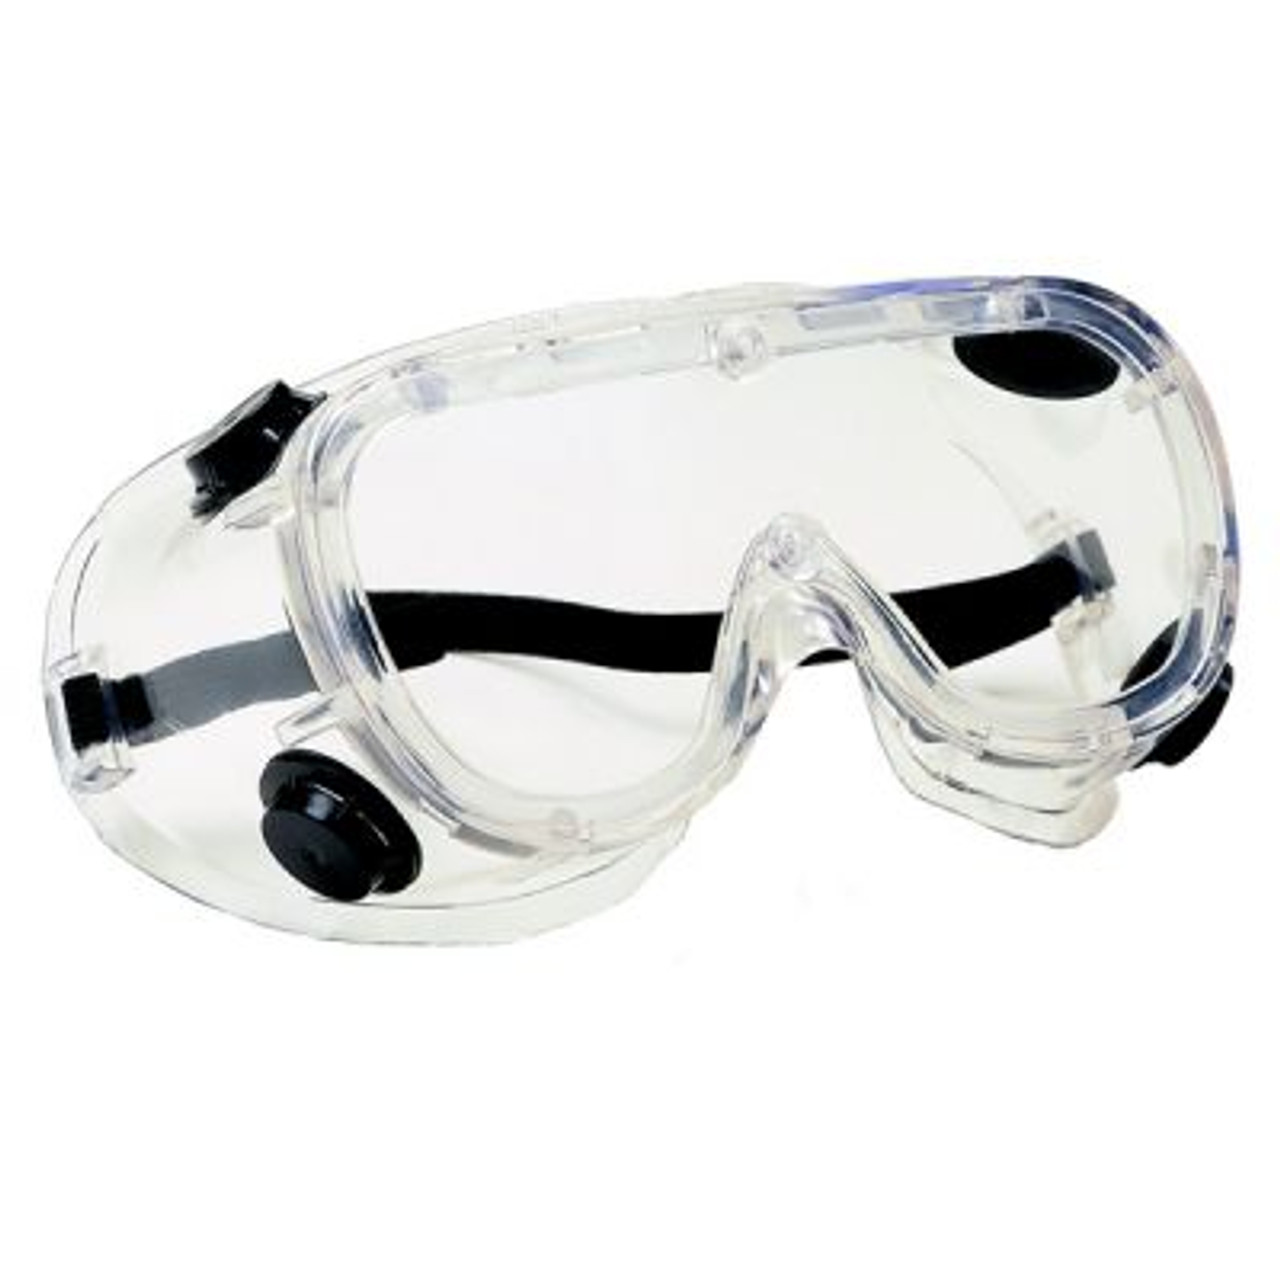 Vented Goggle with Face Shield Provides Sun, Splash and Impact